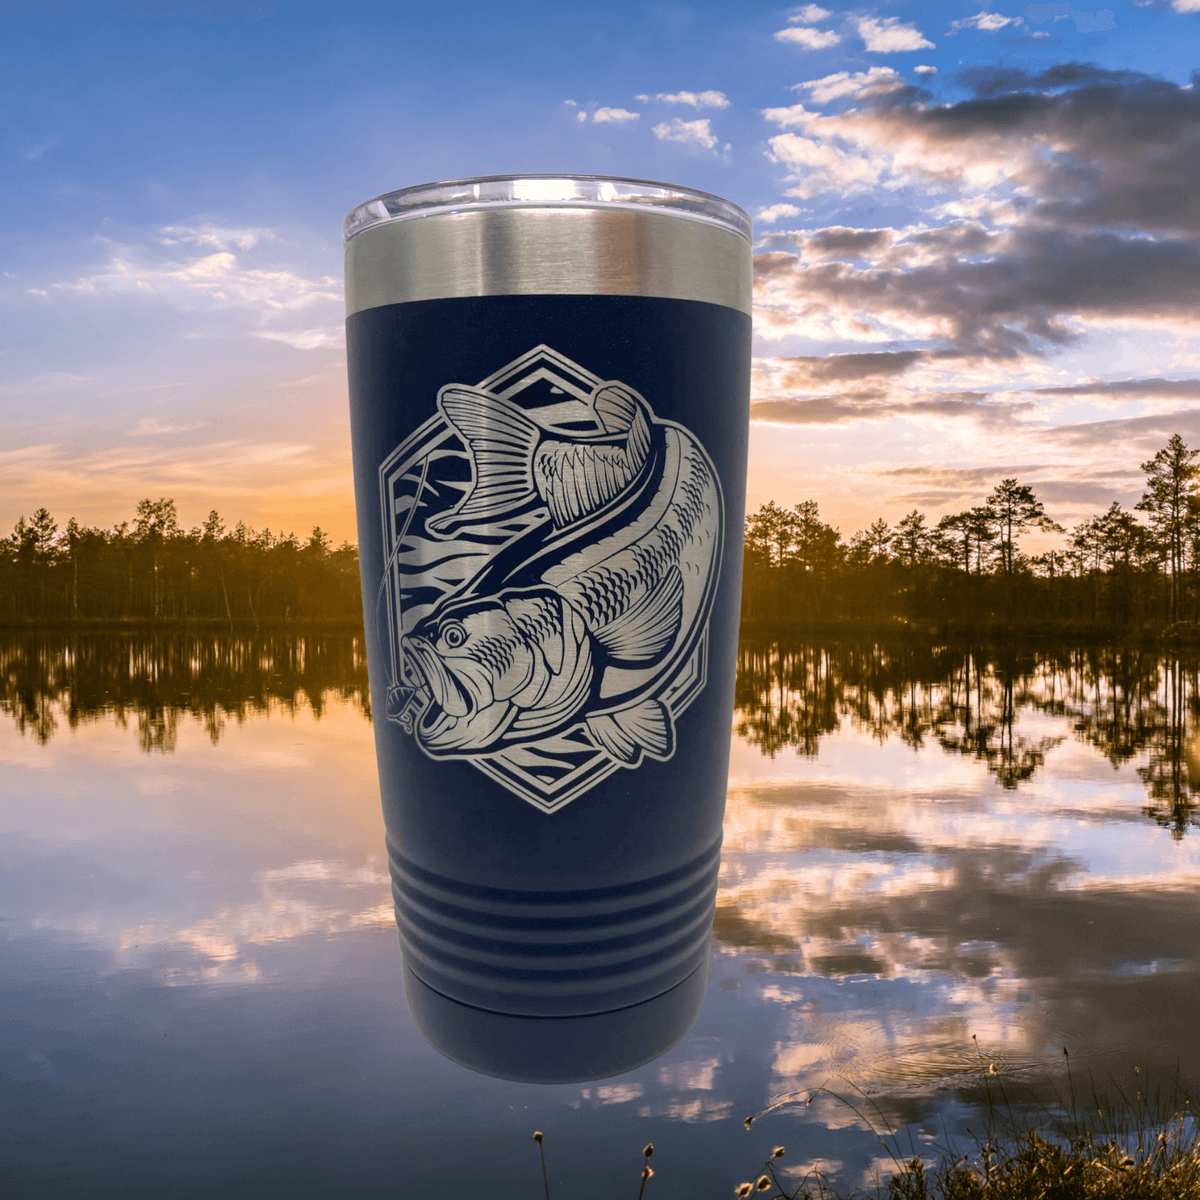 https://cdn.shopify.com/s/files/1/0606/5497/7184/products/wind-river-outpost-bass-fishing-tumbler_1200x.png?v=1690330203